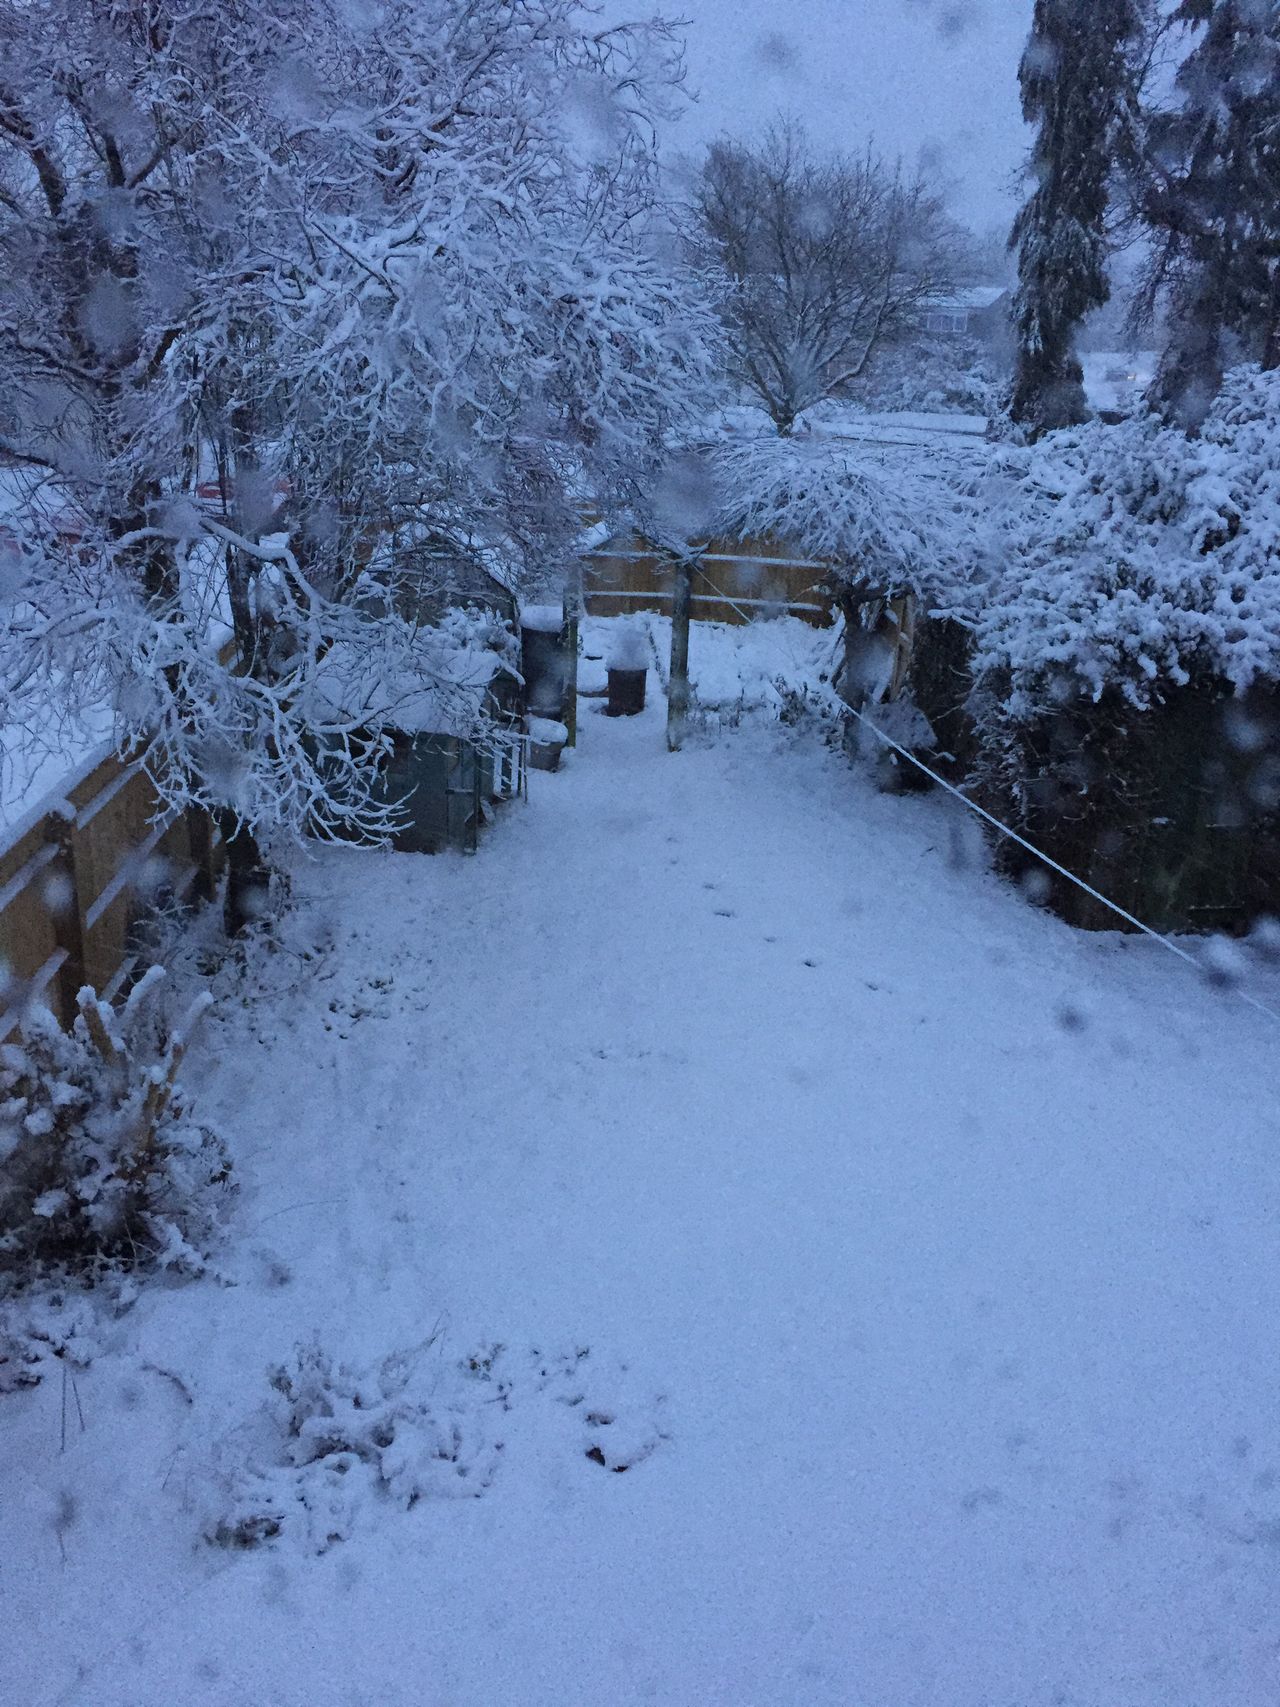 Heavy snow was reported on Sunday morning in Buckinghamshire